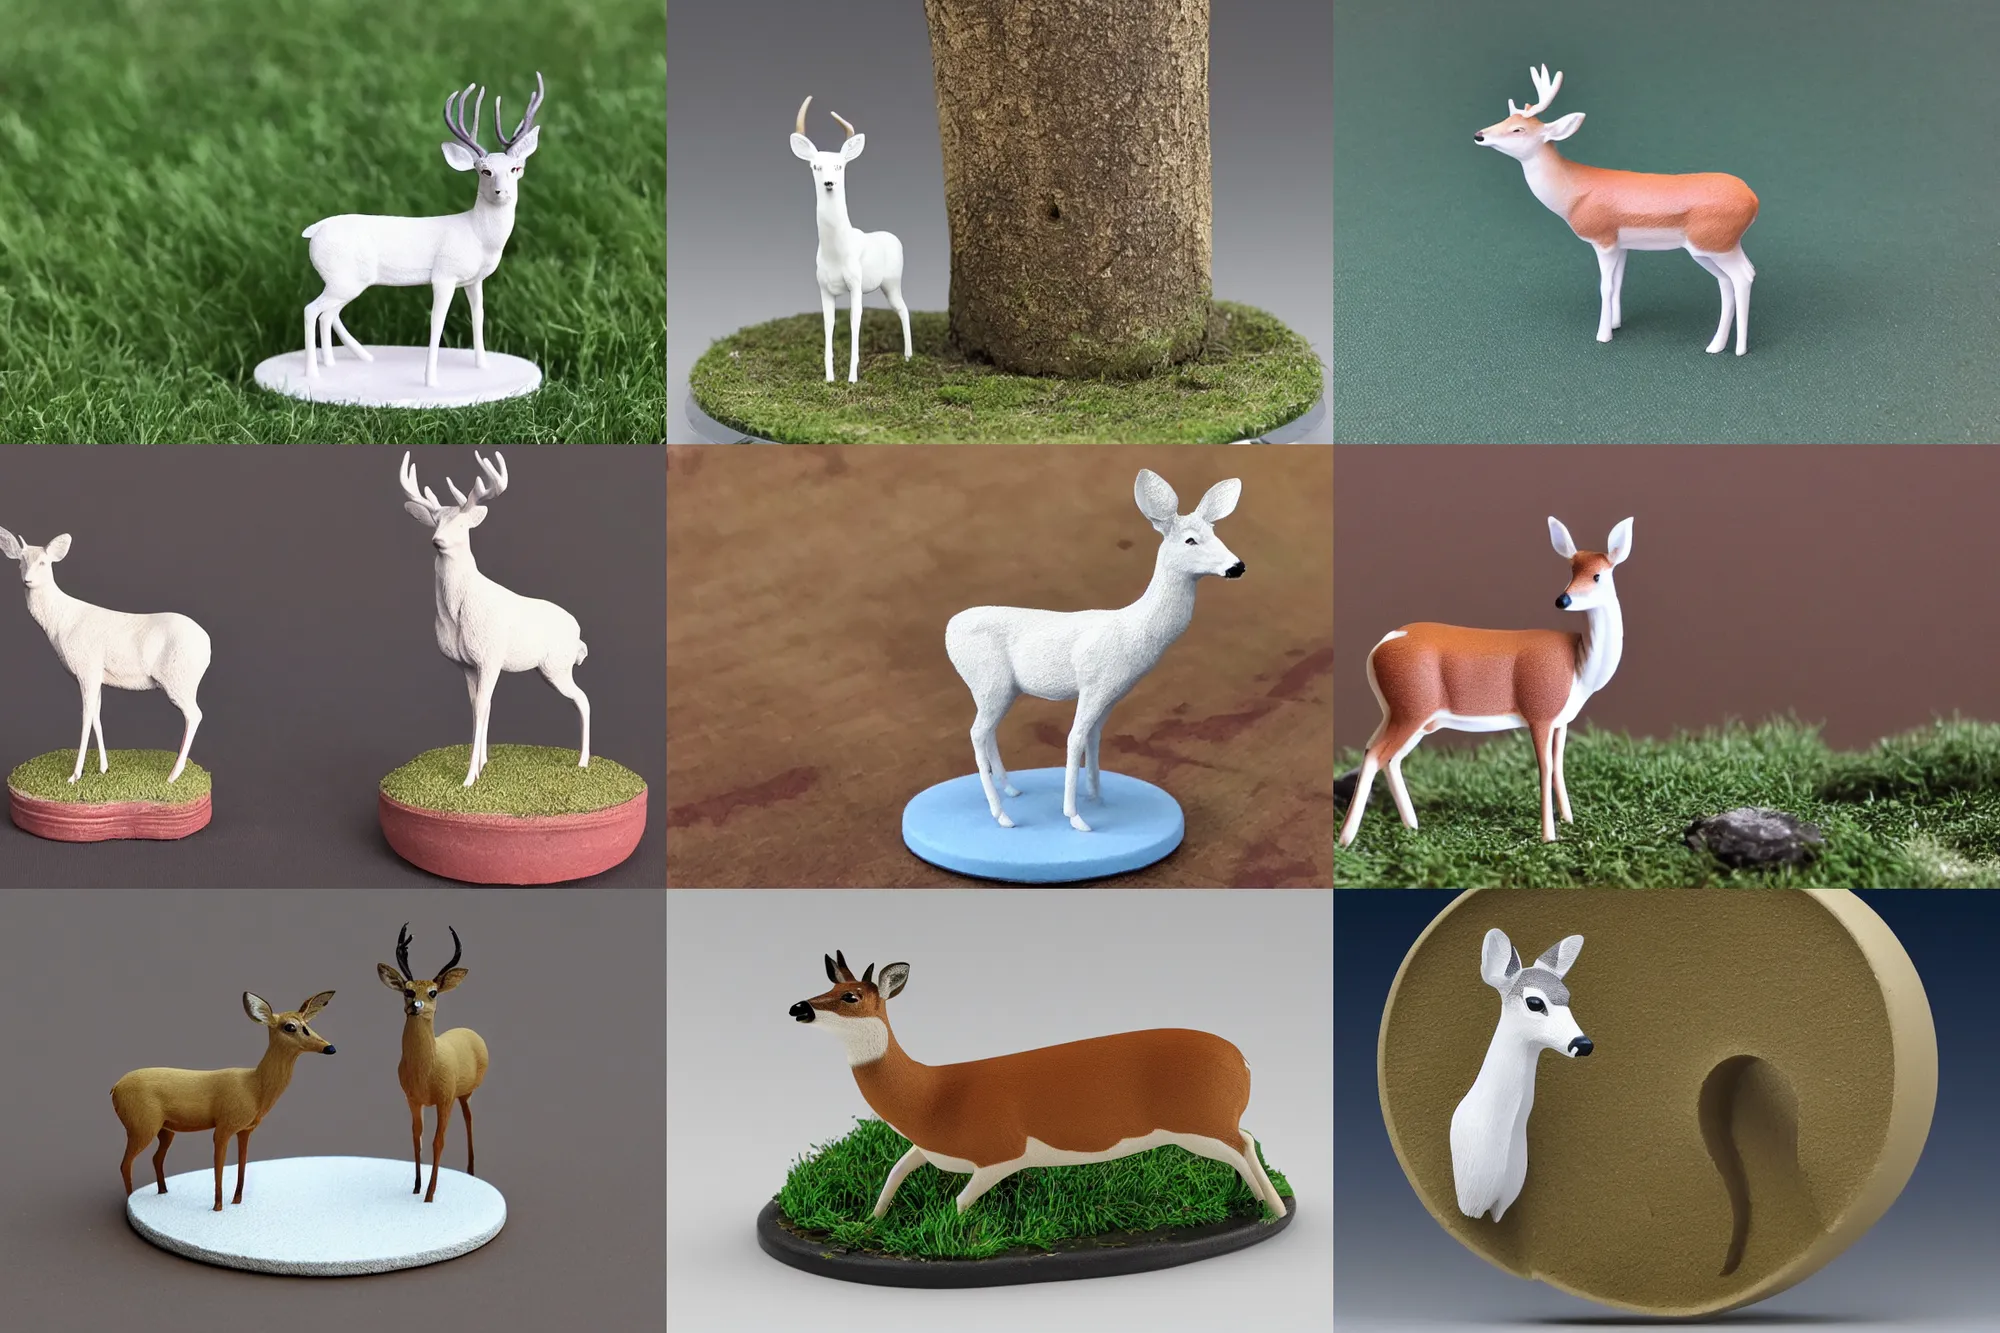 Prompt: painted 3 d printed figurine of a white - tailed deer on cylindrical base, grassy knoll